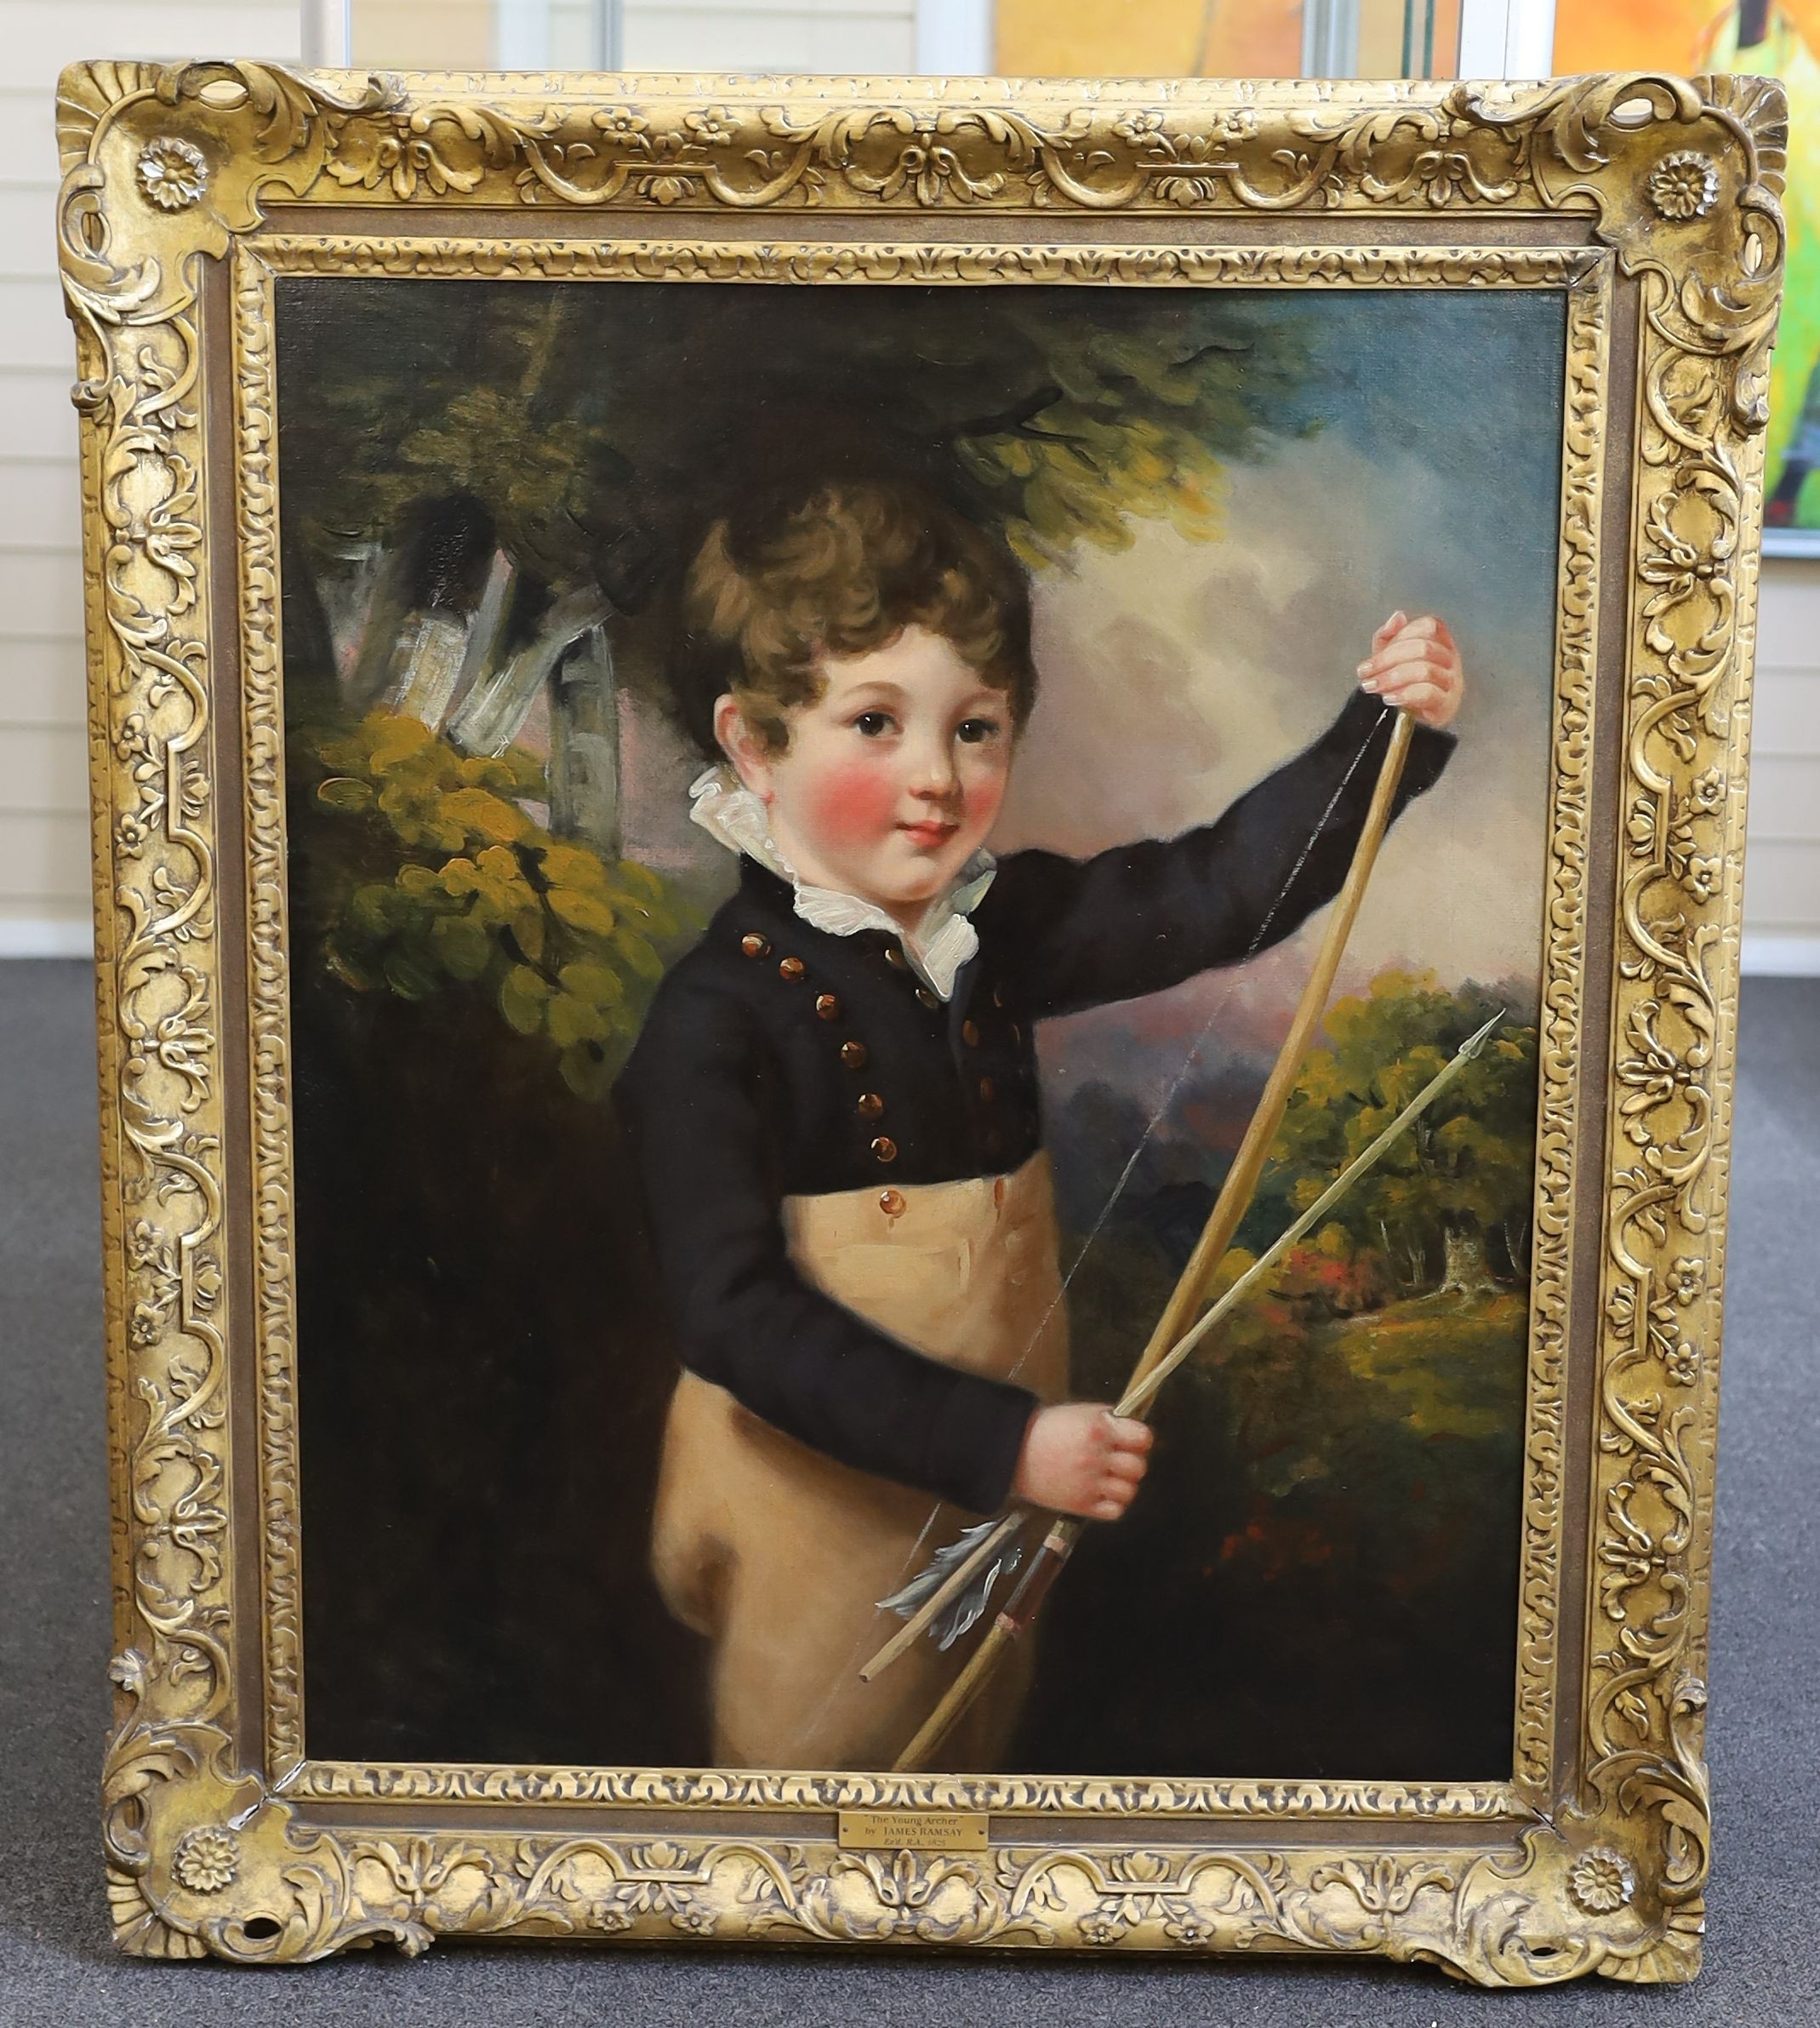 James Ramsay (1786-1854), 'The Young Archer', oil on canvas, 75 x 62cm